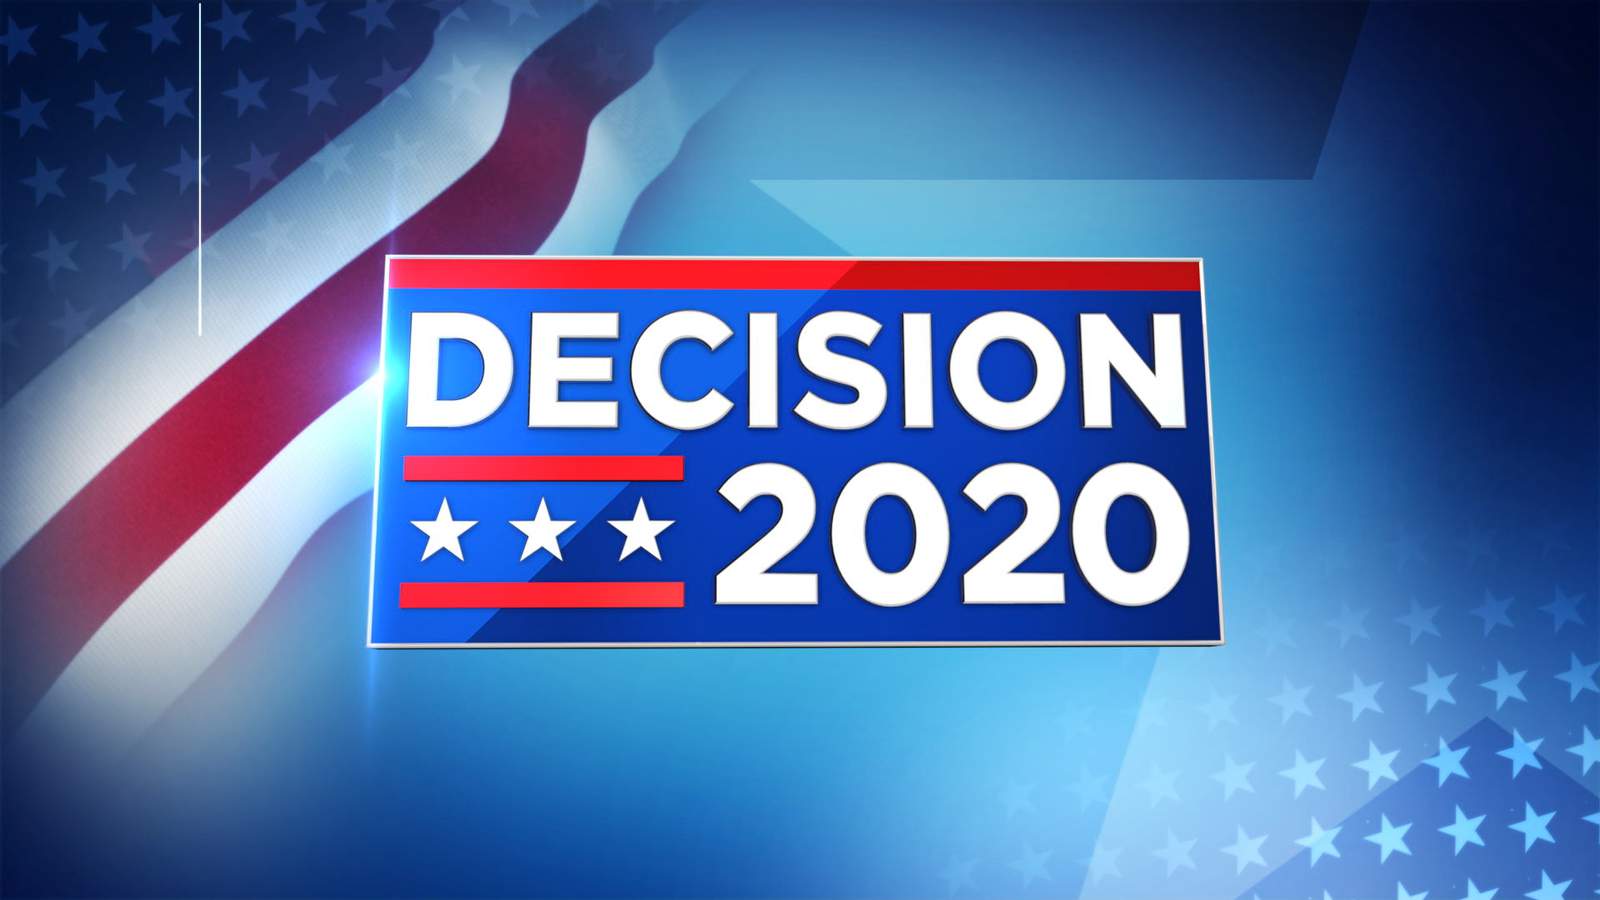 Democratic Presidential Primary Election Results for Richmond on March 3, 2020